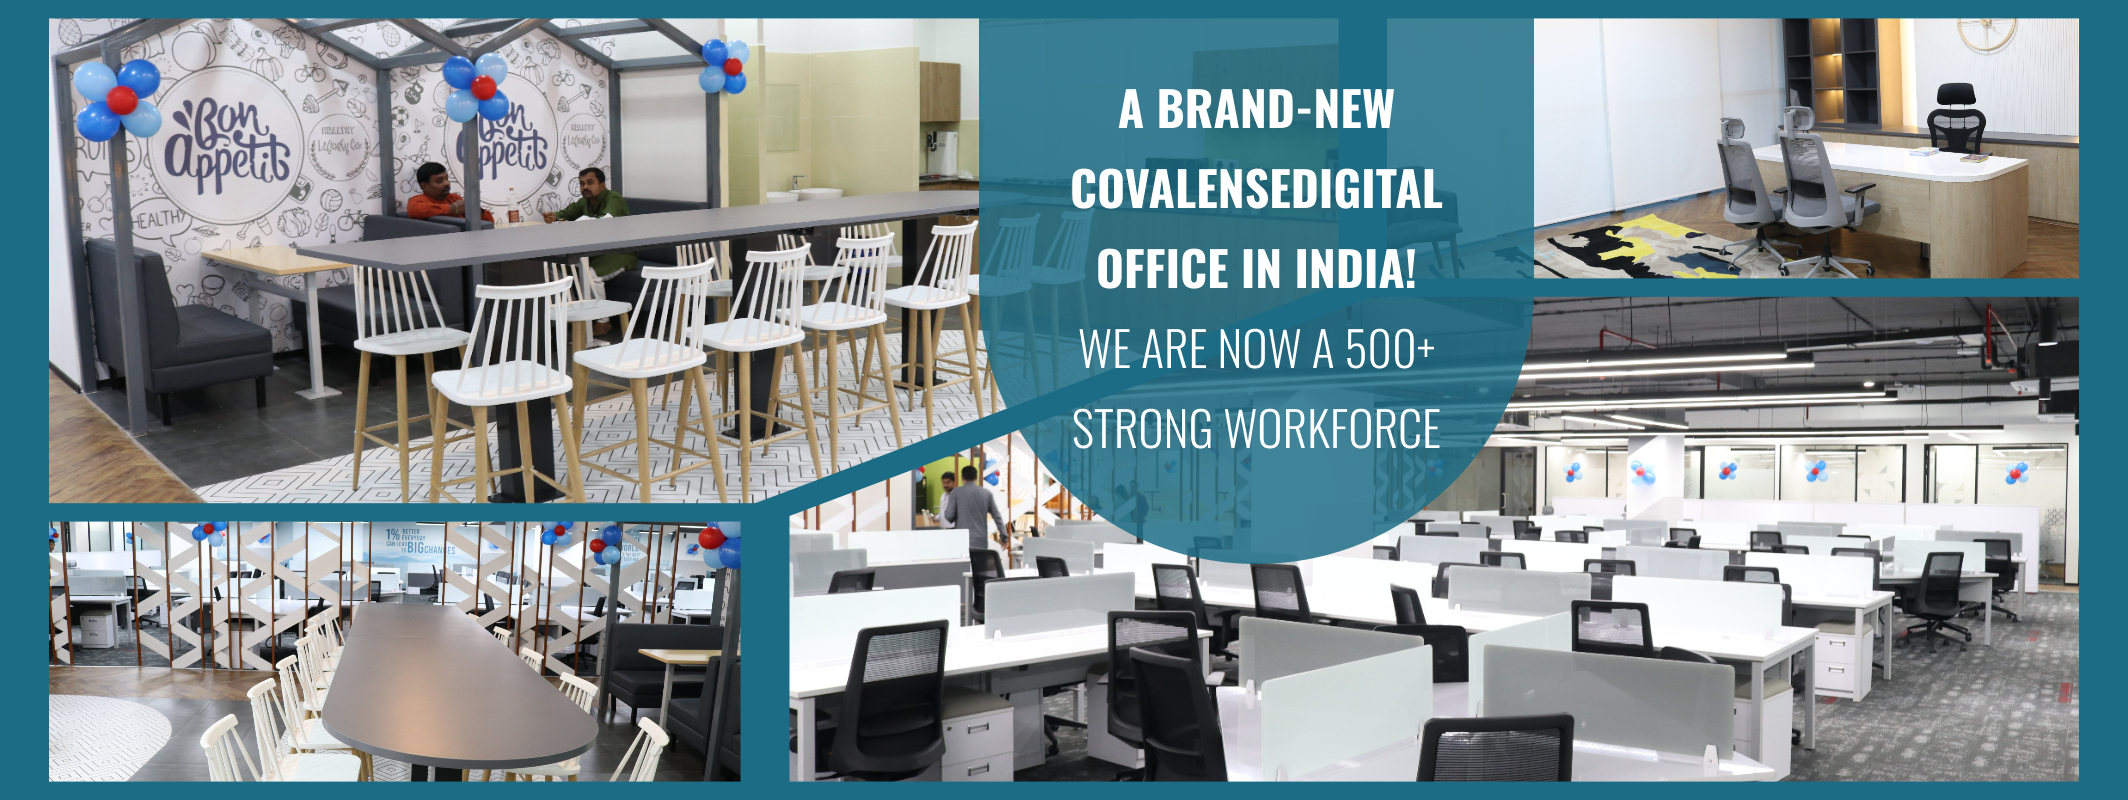 A brand-new Covalensedigital office in India!